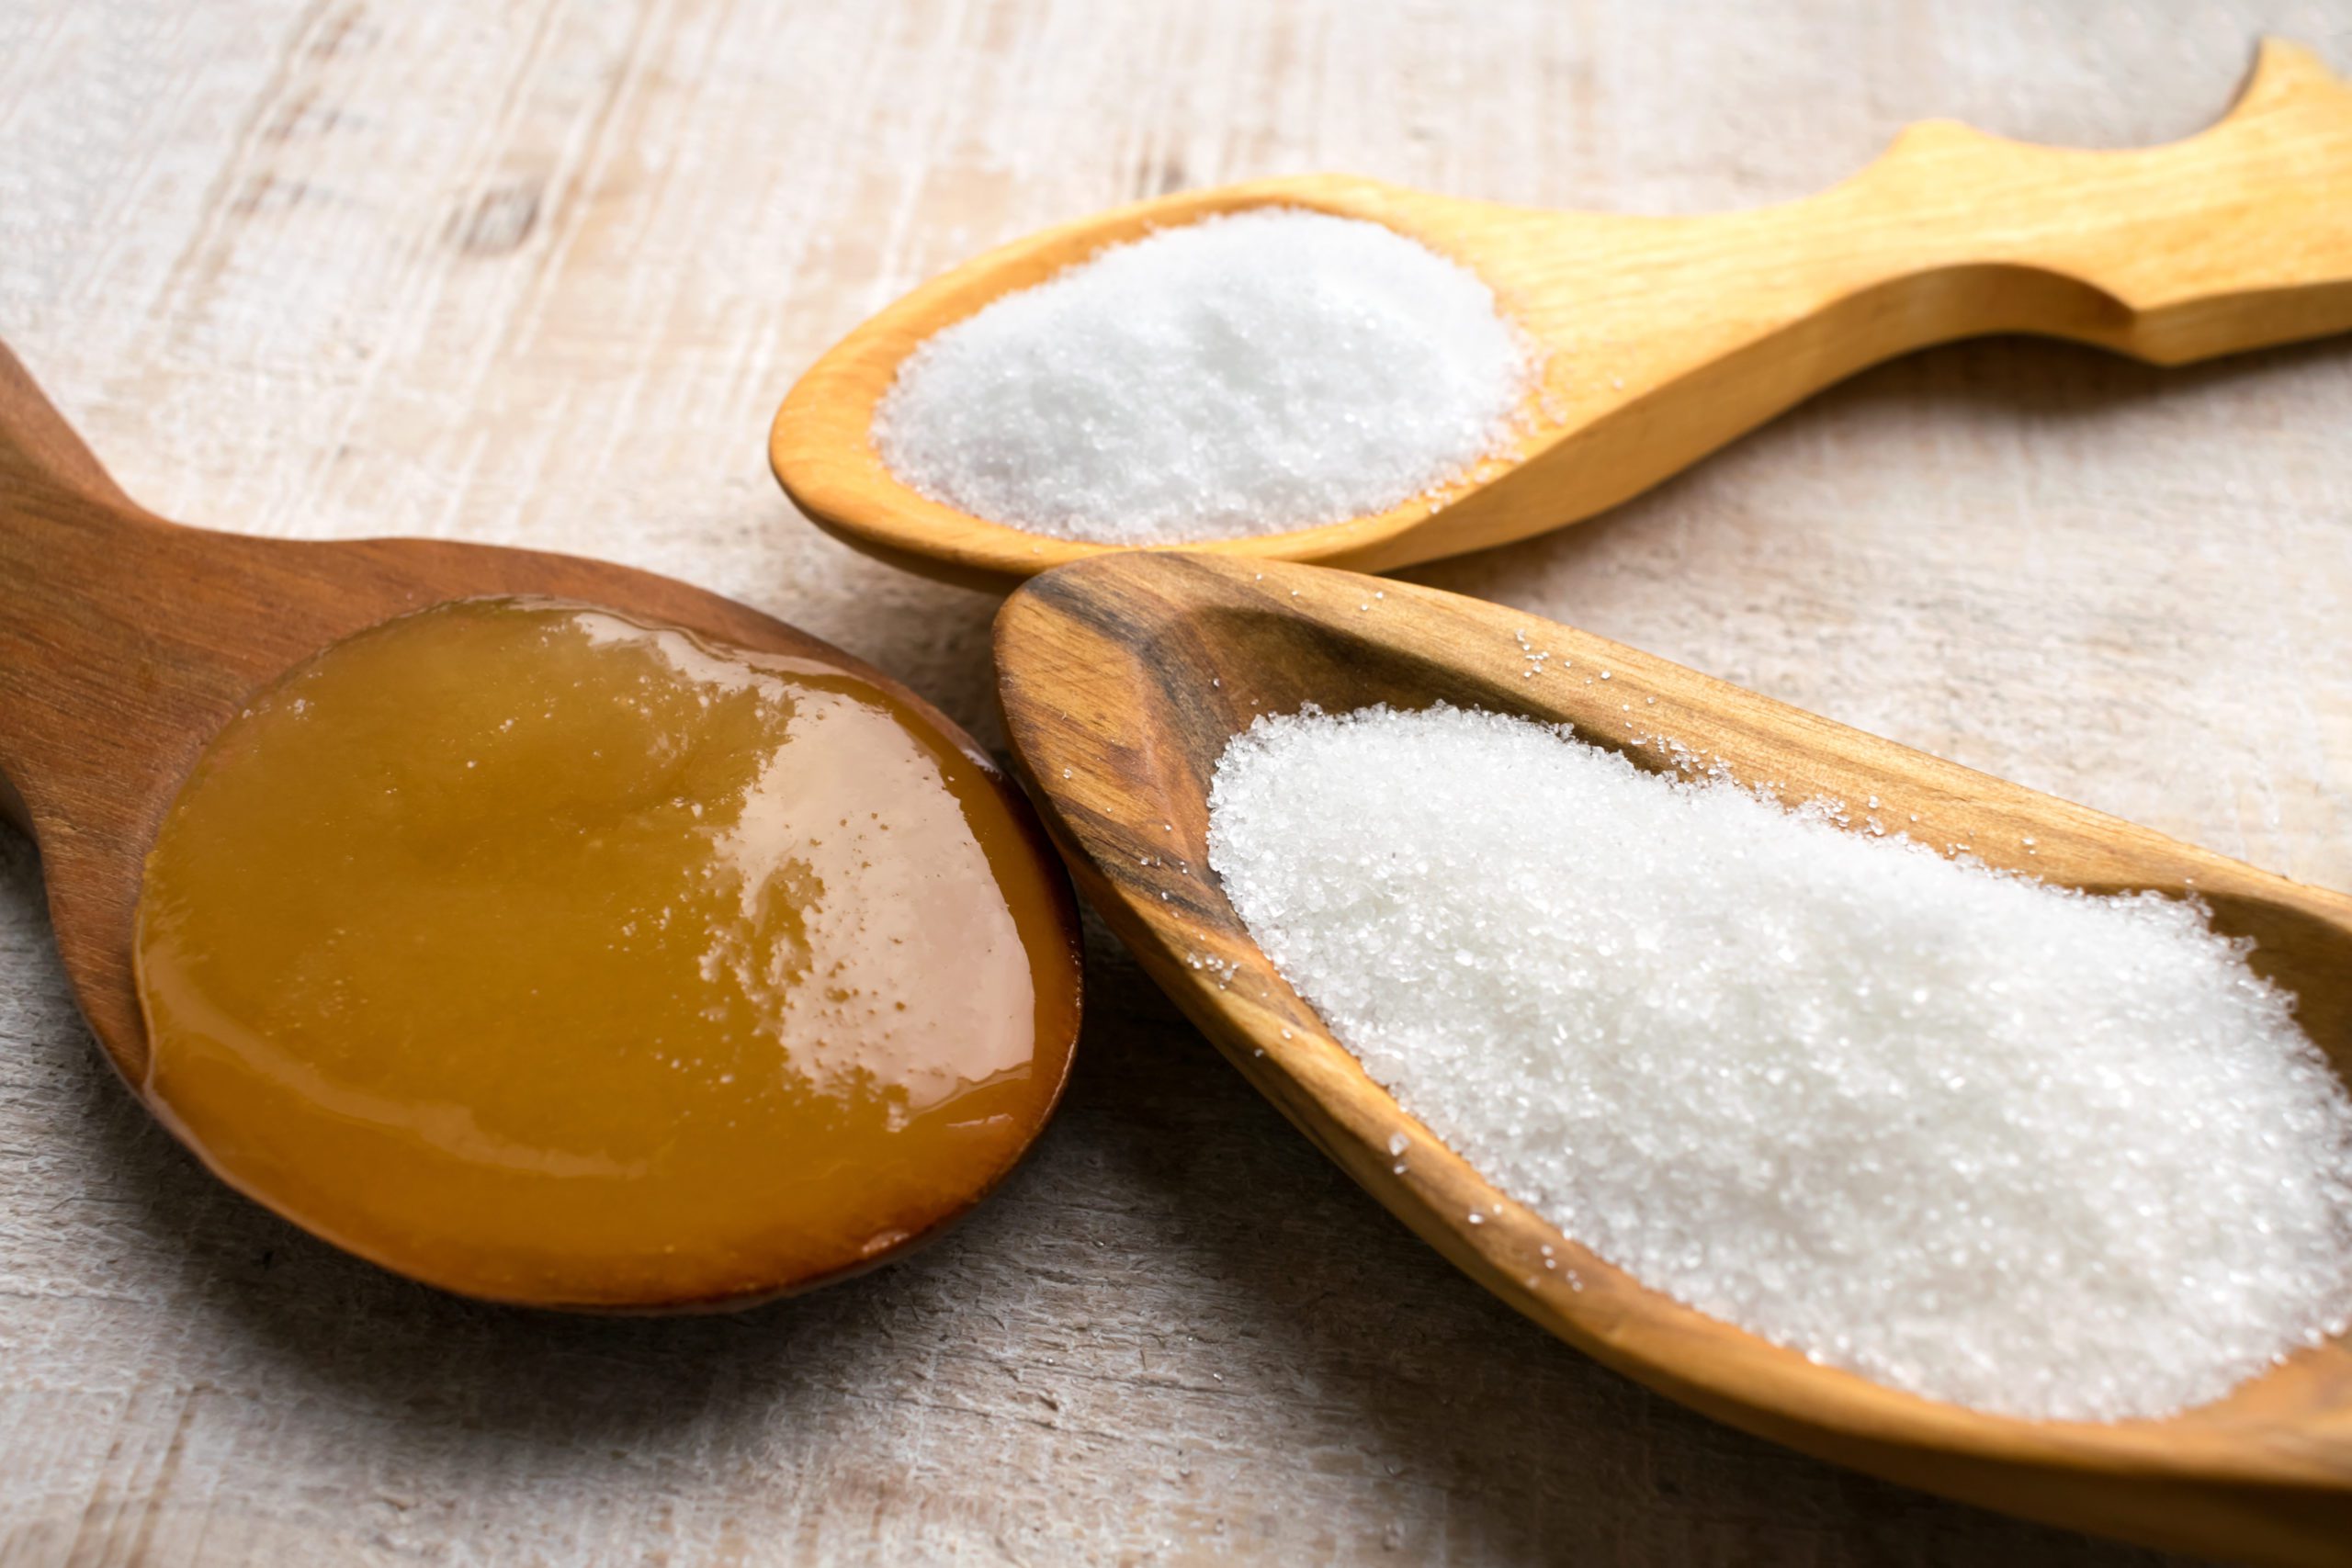 Sugar Substitues Possibly Tough on Liver